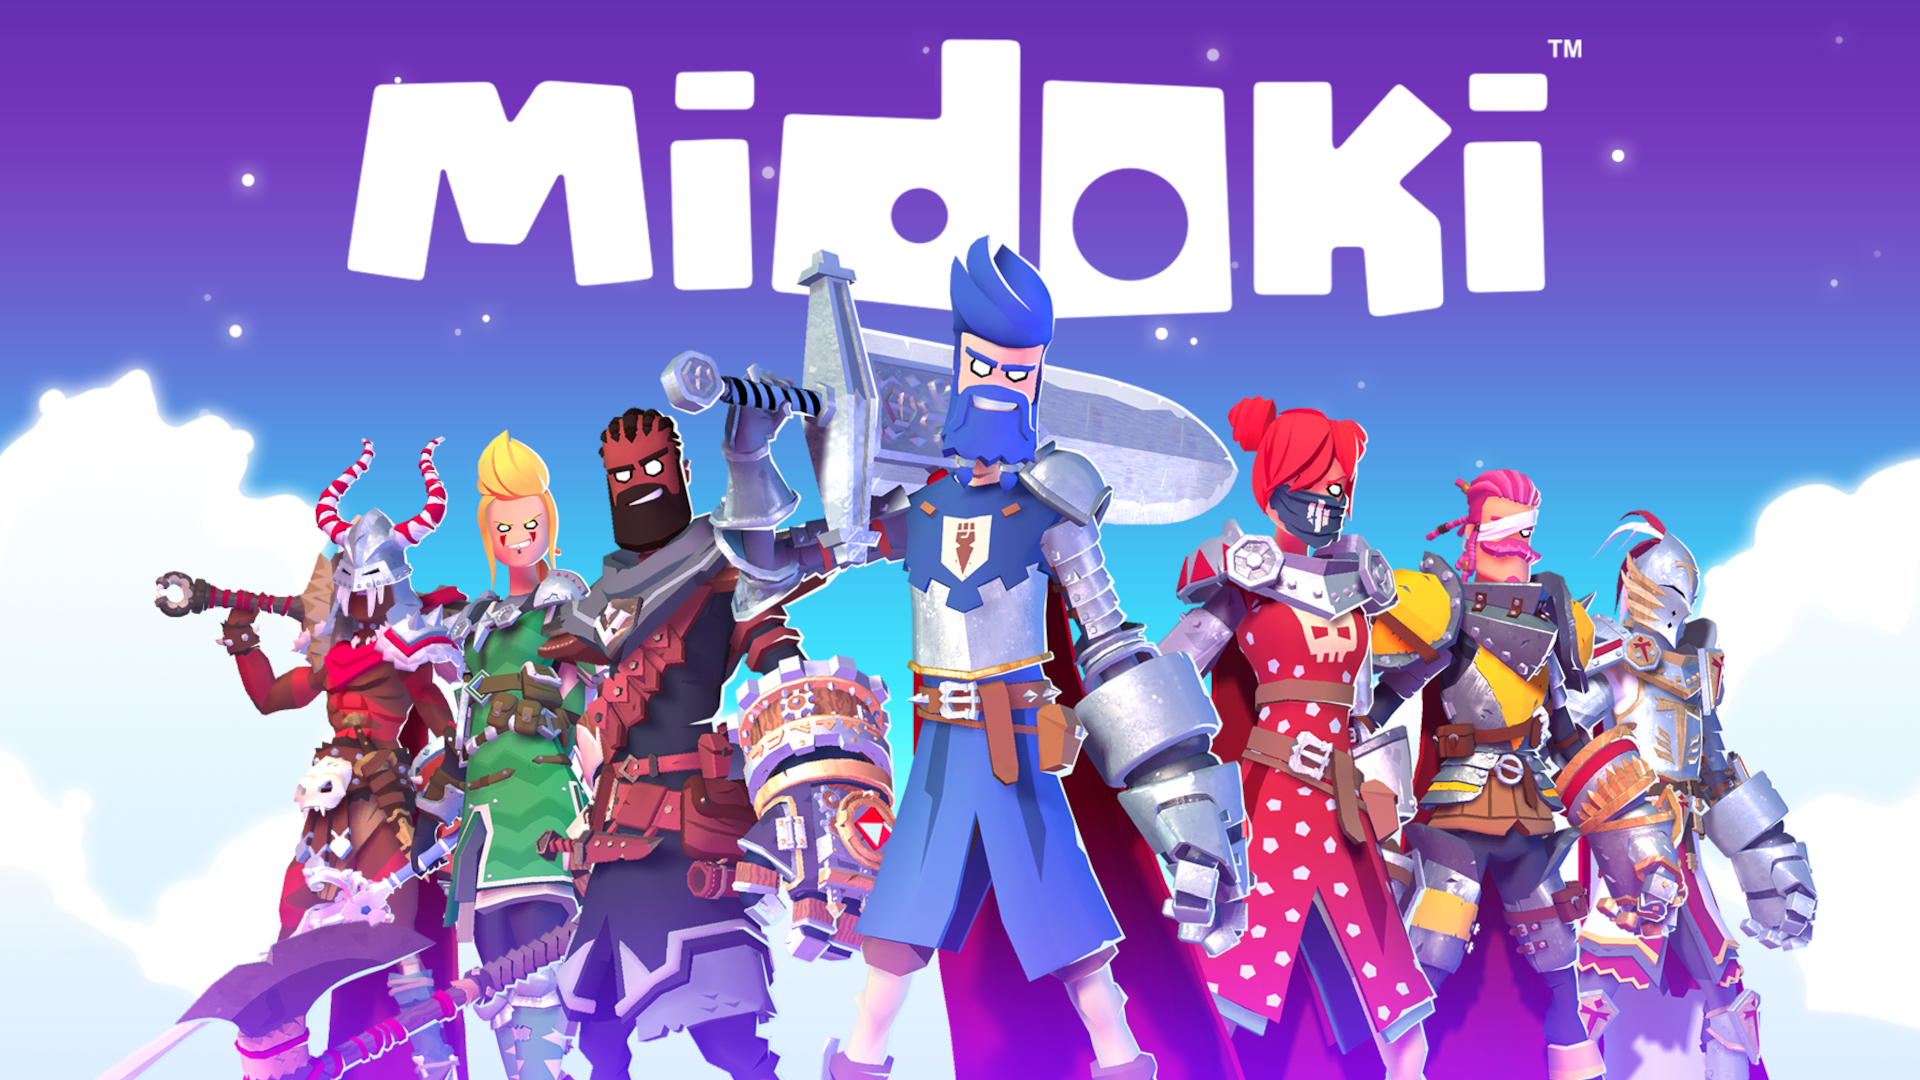 Midoki joined the Sumo Digital family in 2023